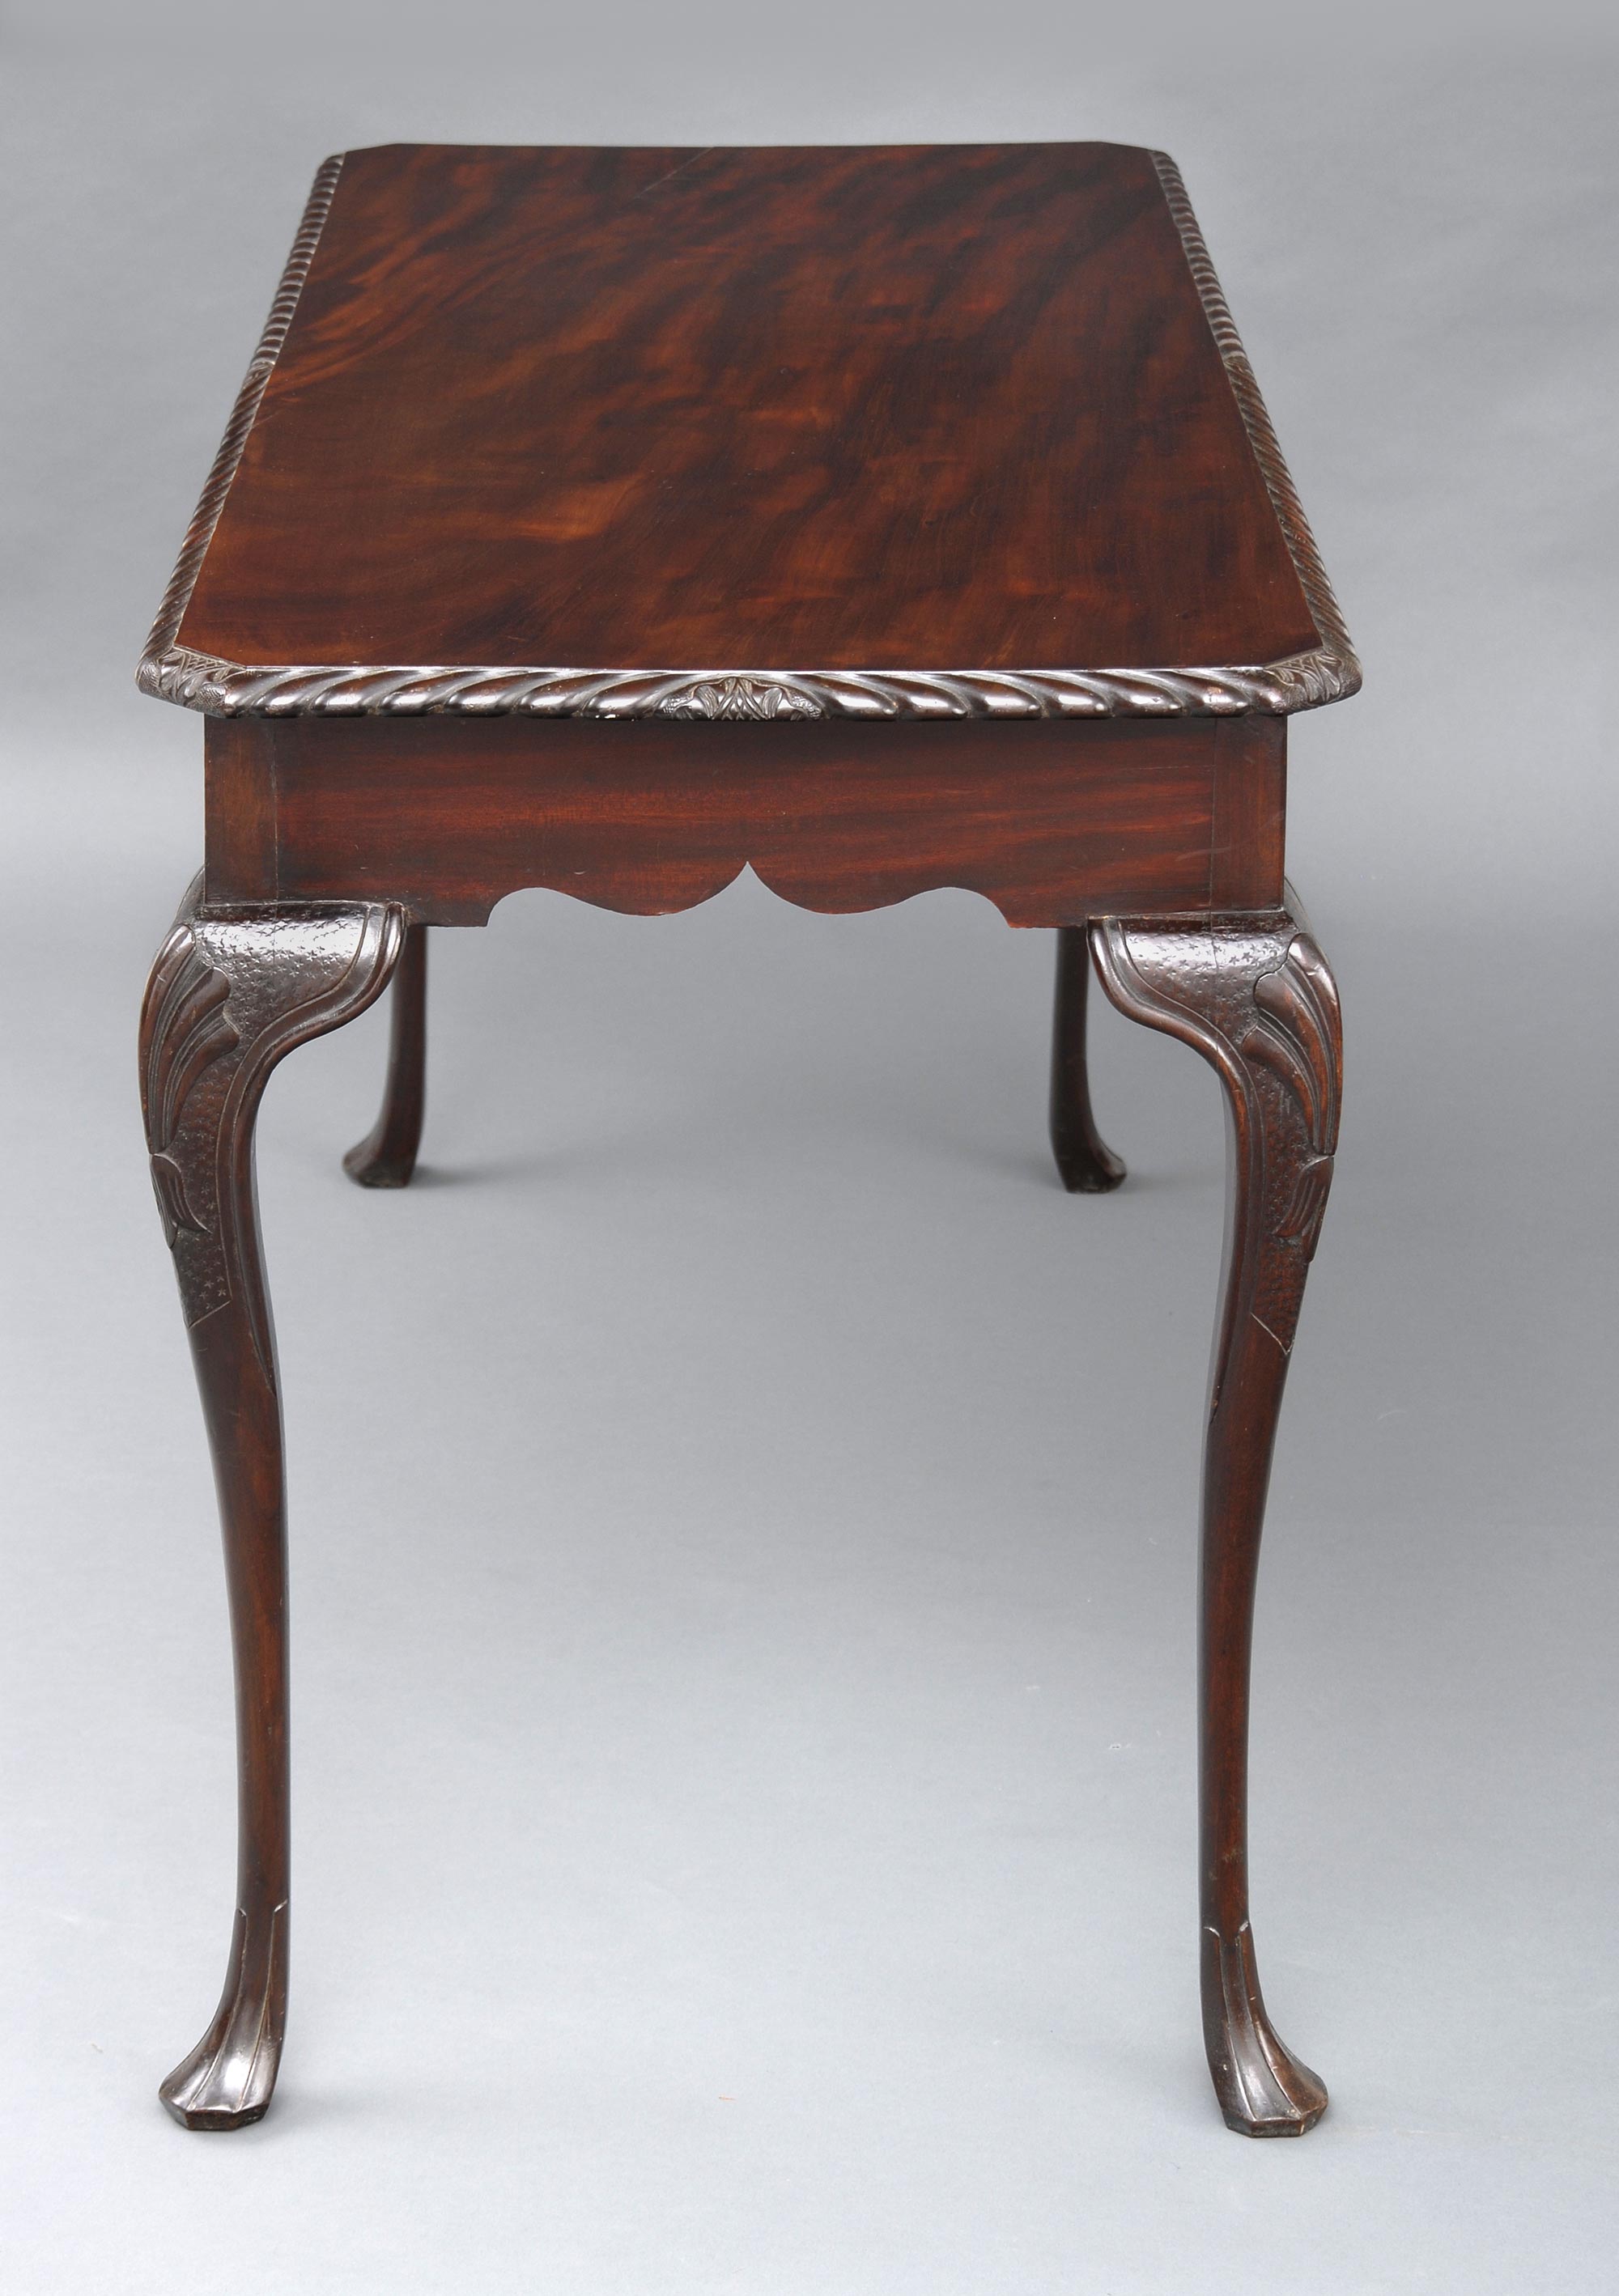 Antique Side Tables | Antique Irish Carved Mahogany Side Table